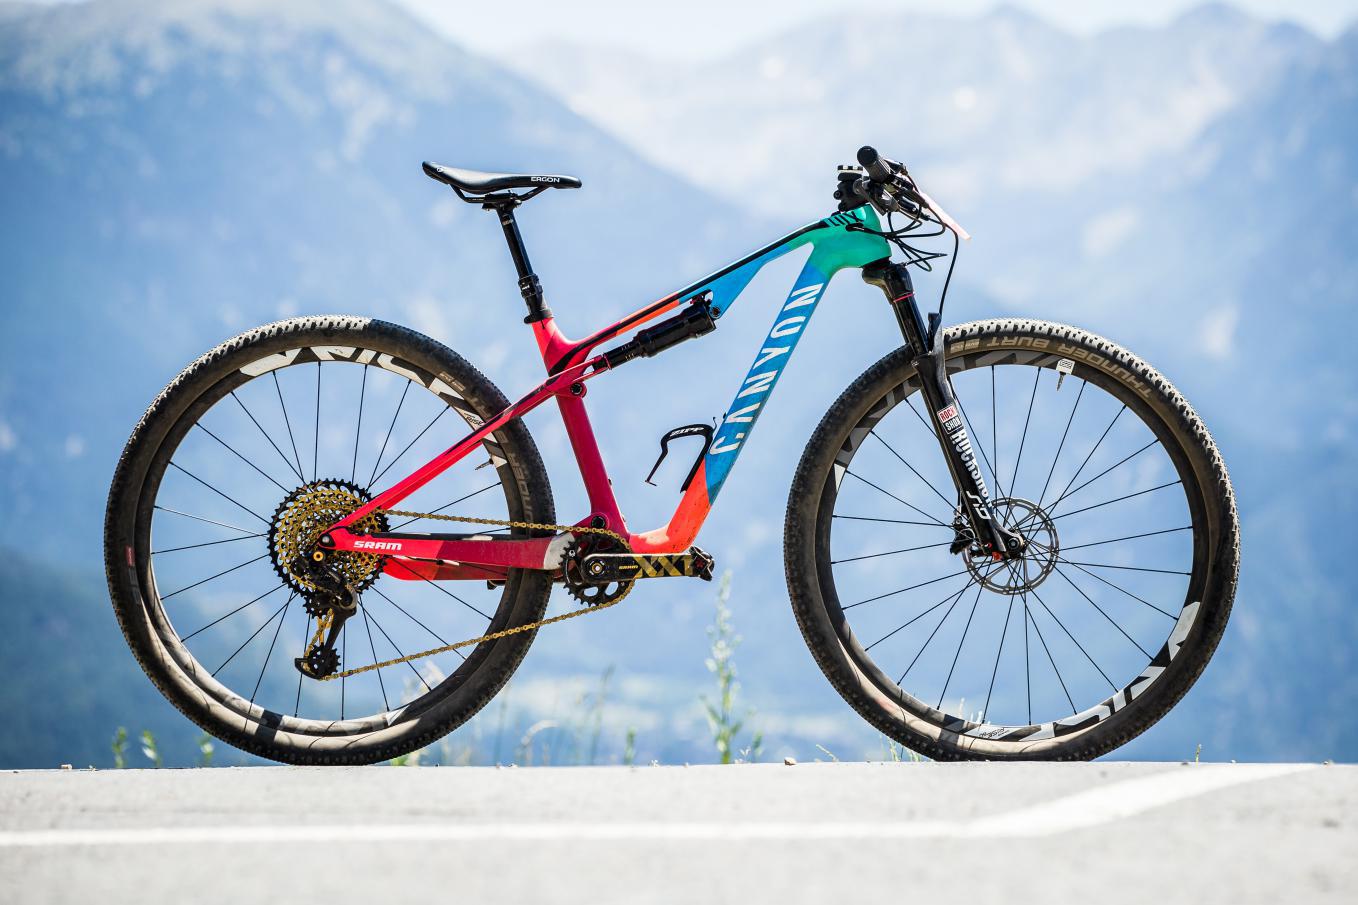 Canyon Freshen Up Their Xc Race Mountain Bikes With The Lux And Exceed Spark Bike